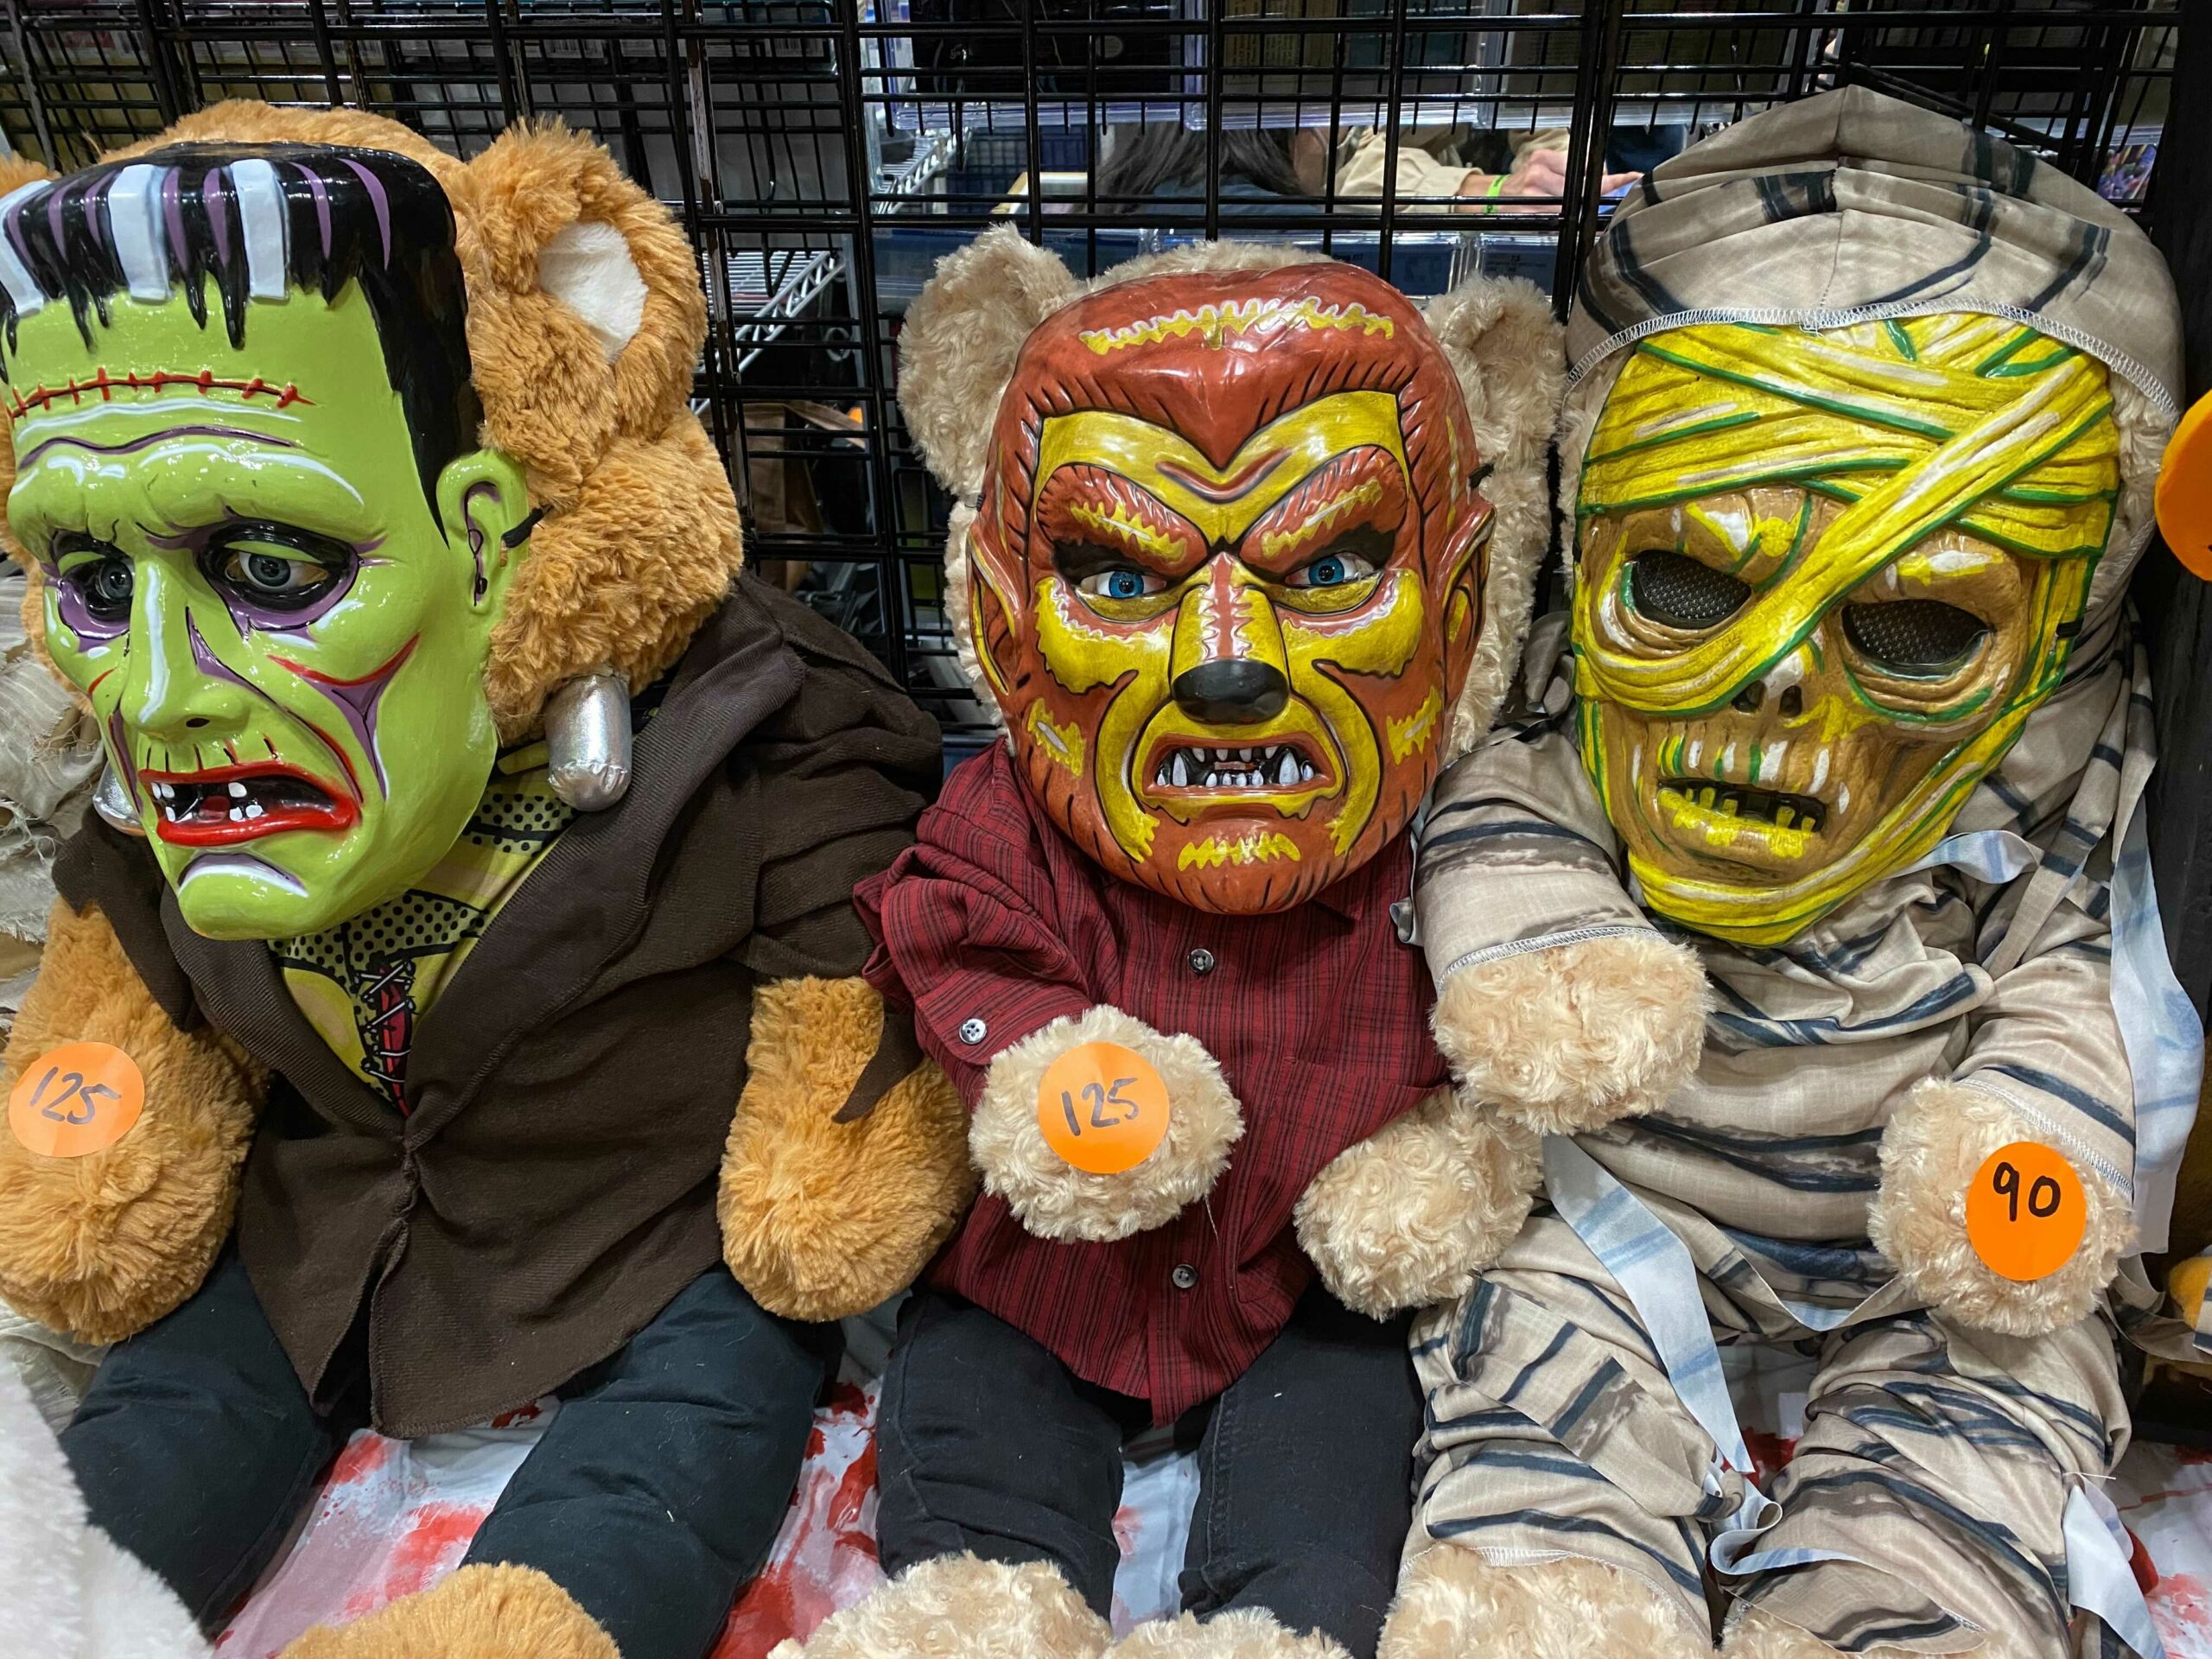 Three teddy bears dressed up with Halloween masks to look like monster: Frankenstein's creature, a wolfman, and a mummy.